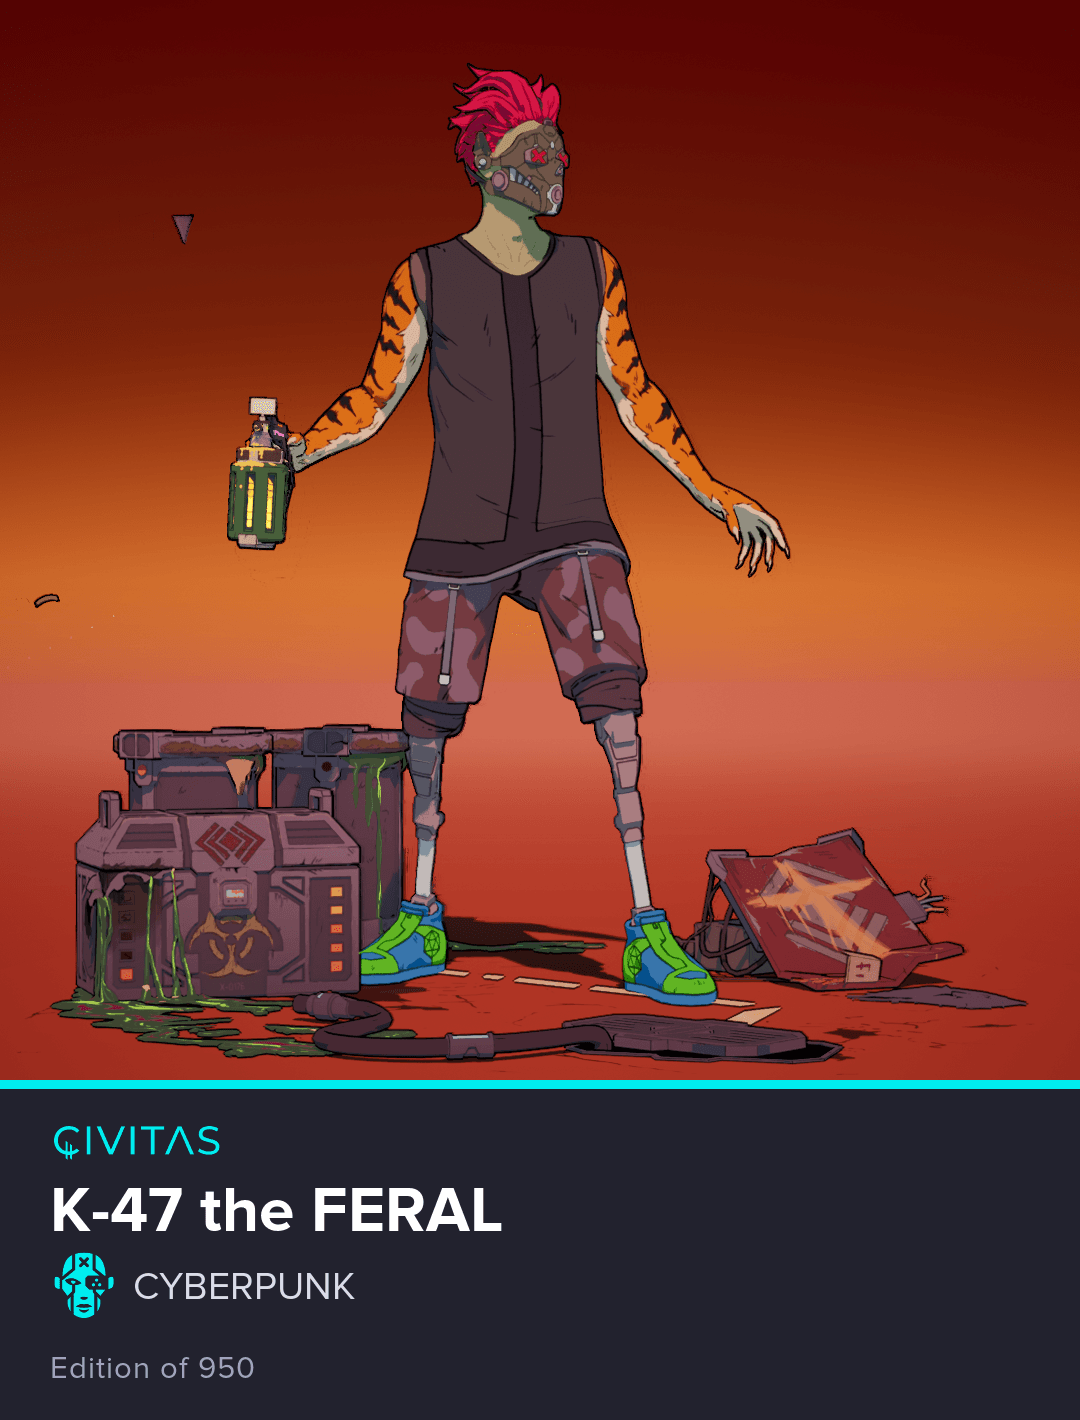 K-47 the Feral #424